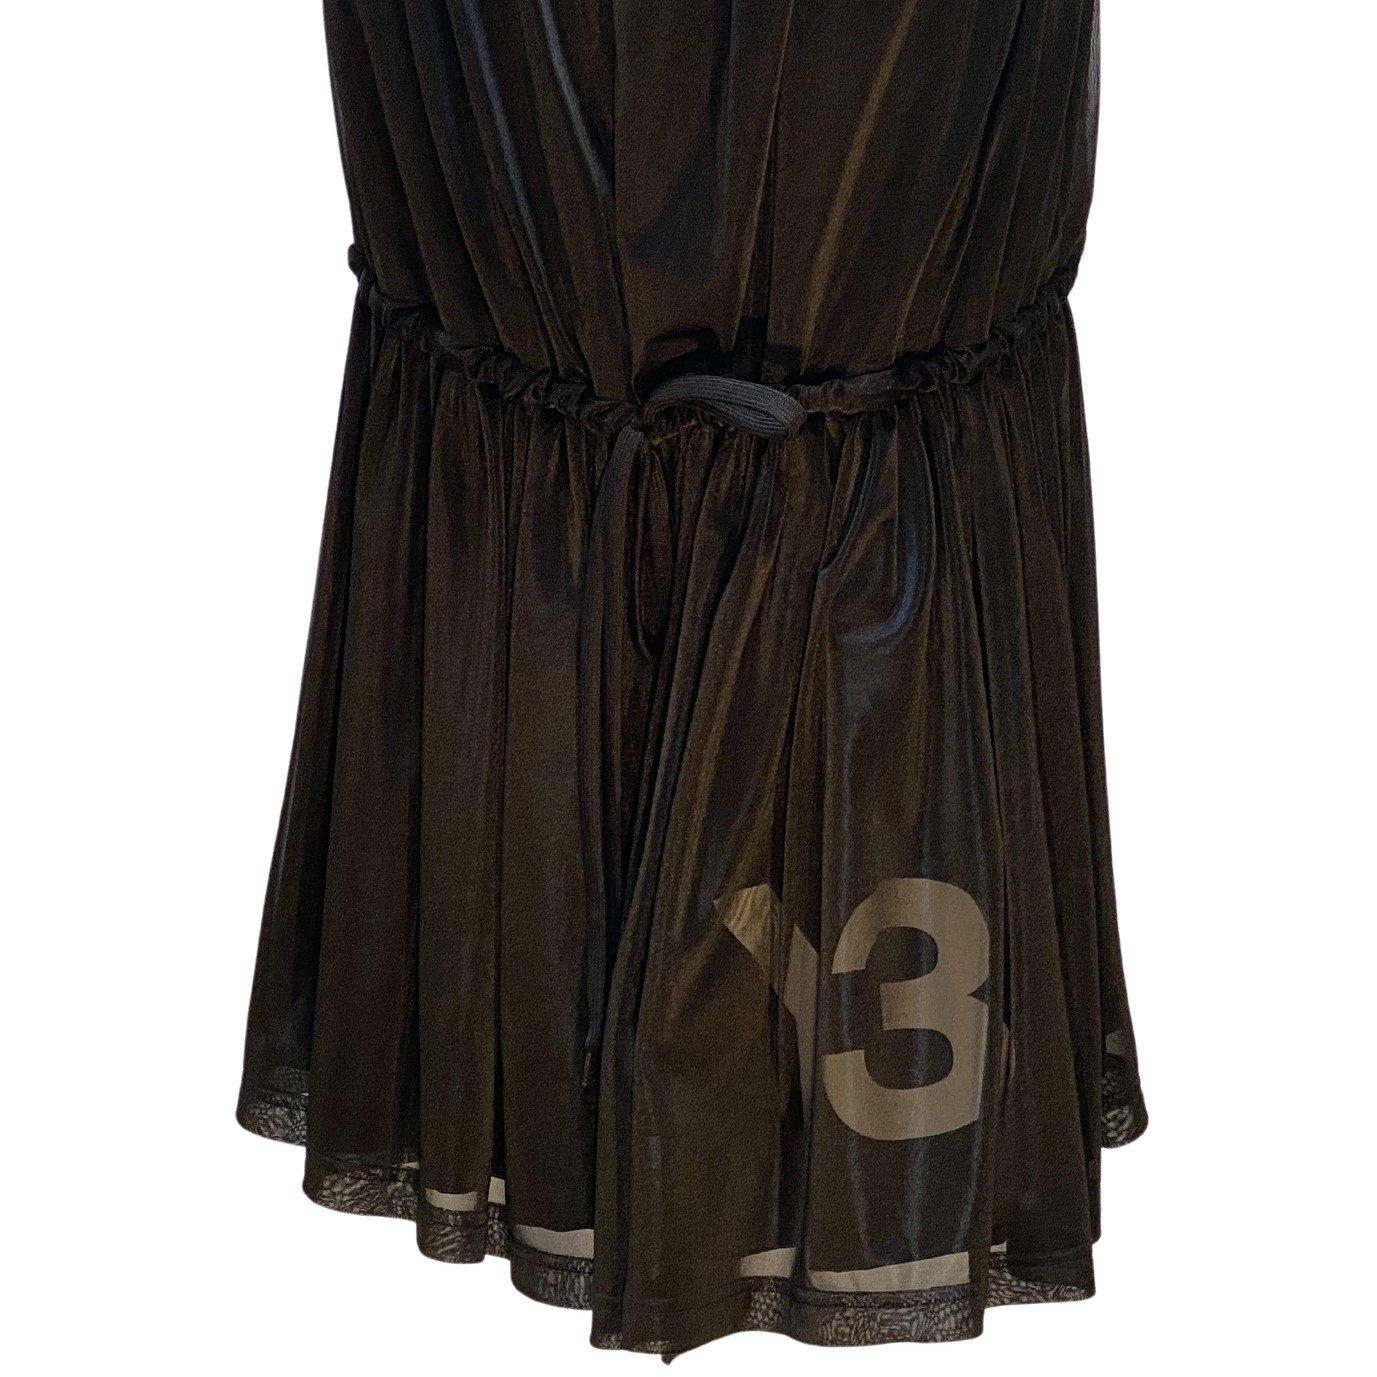 This vintage layered, flounced skirt from Y-3 has an elasticized waist, which allows it to convert to a strapless dress. A drawstring gathers the black fabric at knee-length, or can be tied as a belt if worn as a dress, creating a flowing feminine